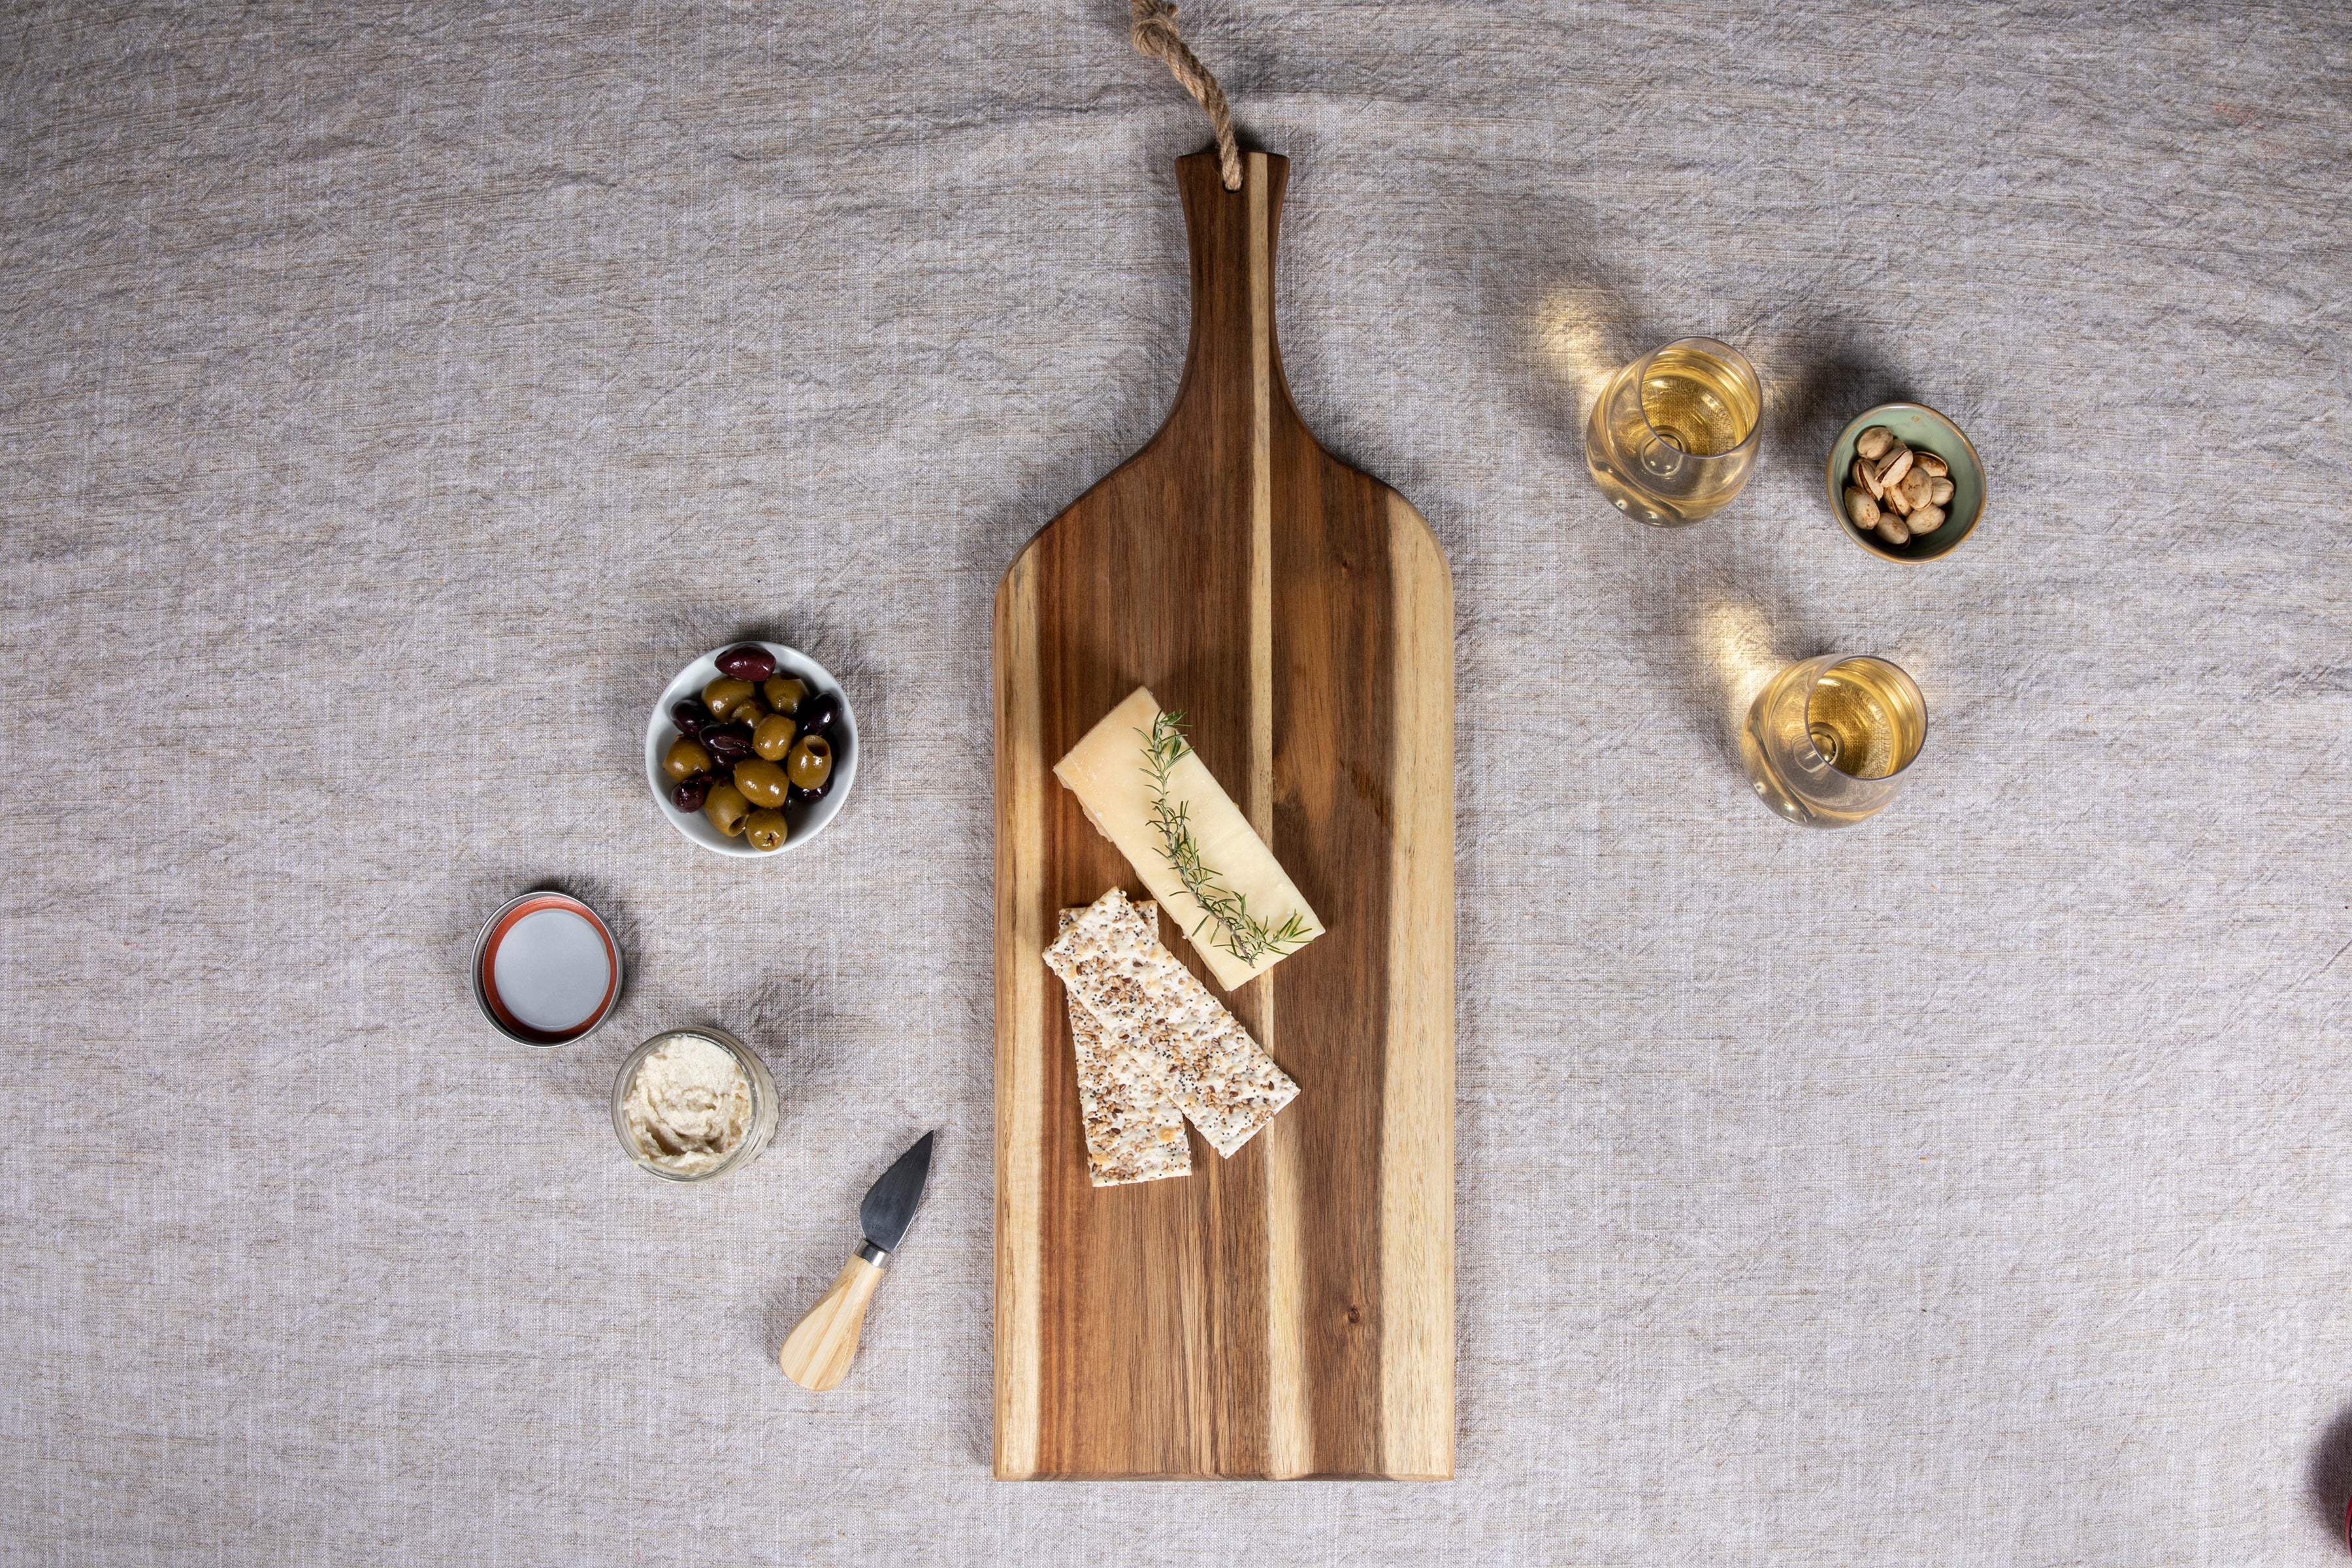 Detroit Red Wings - Artisan 24" Acacia Charcuterie Board